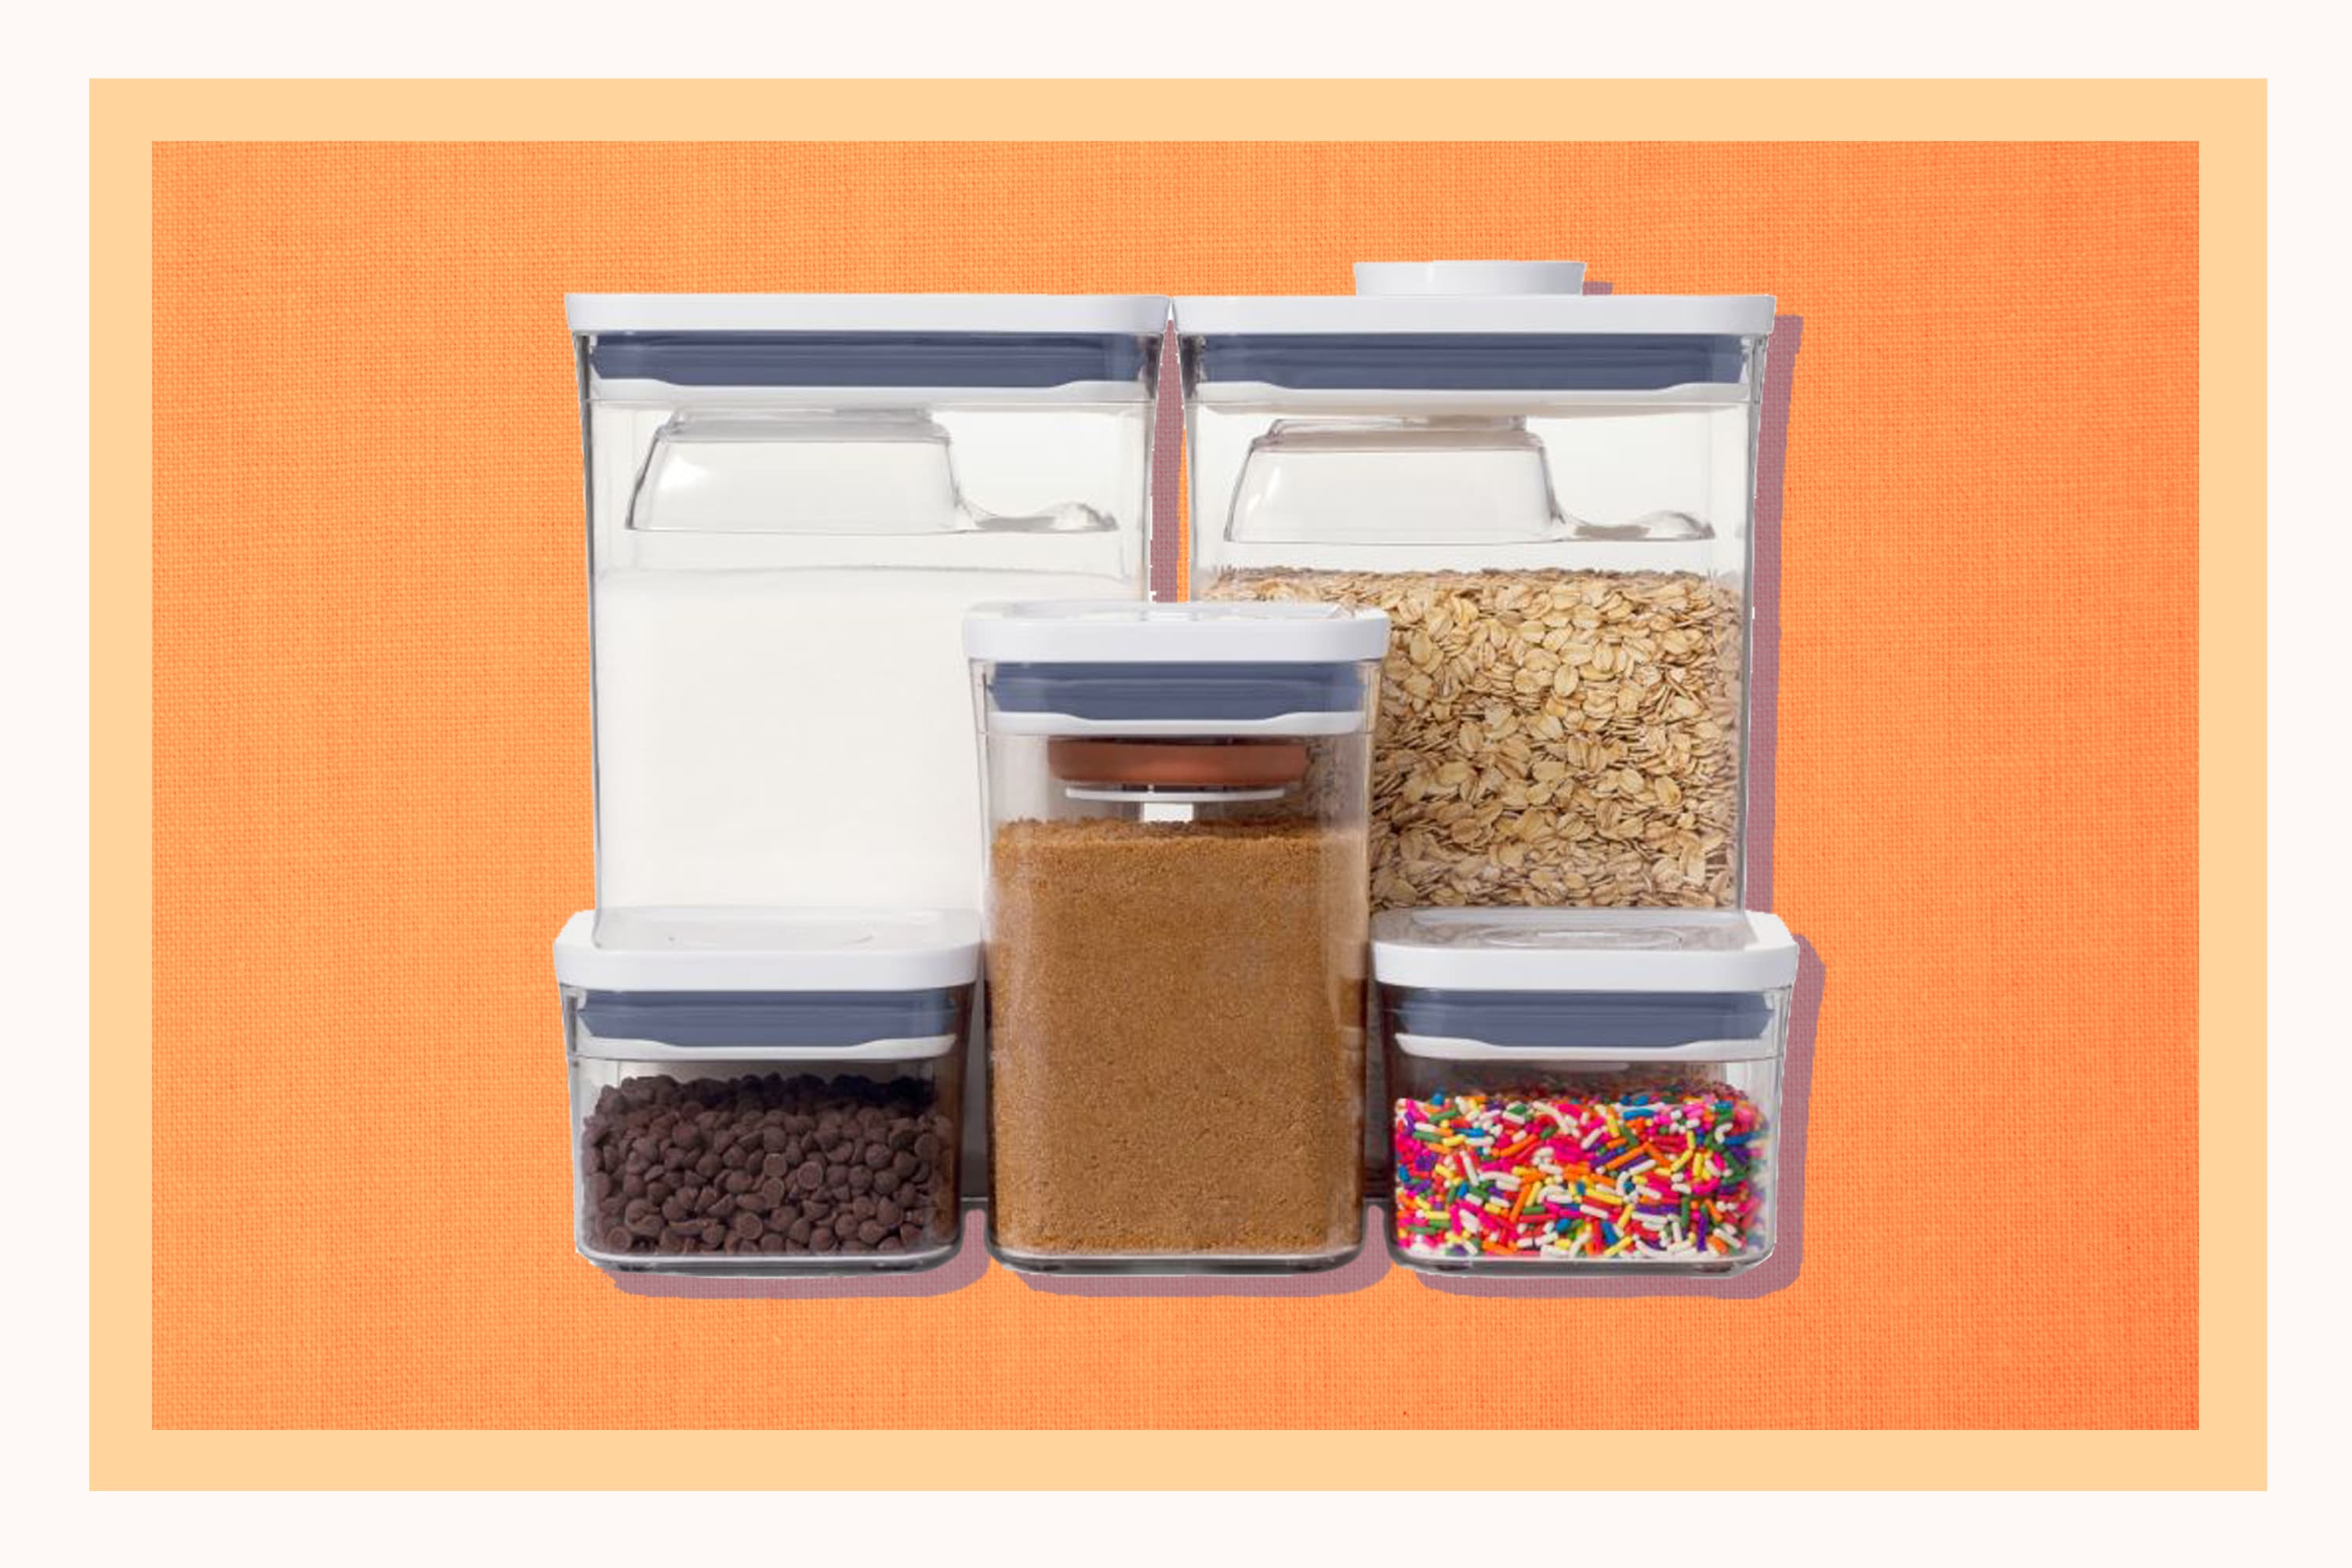 OXO Kitchen Canisters - Bed Bath & Beyond